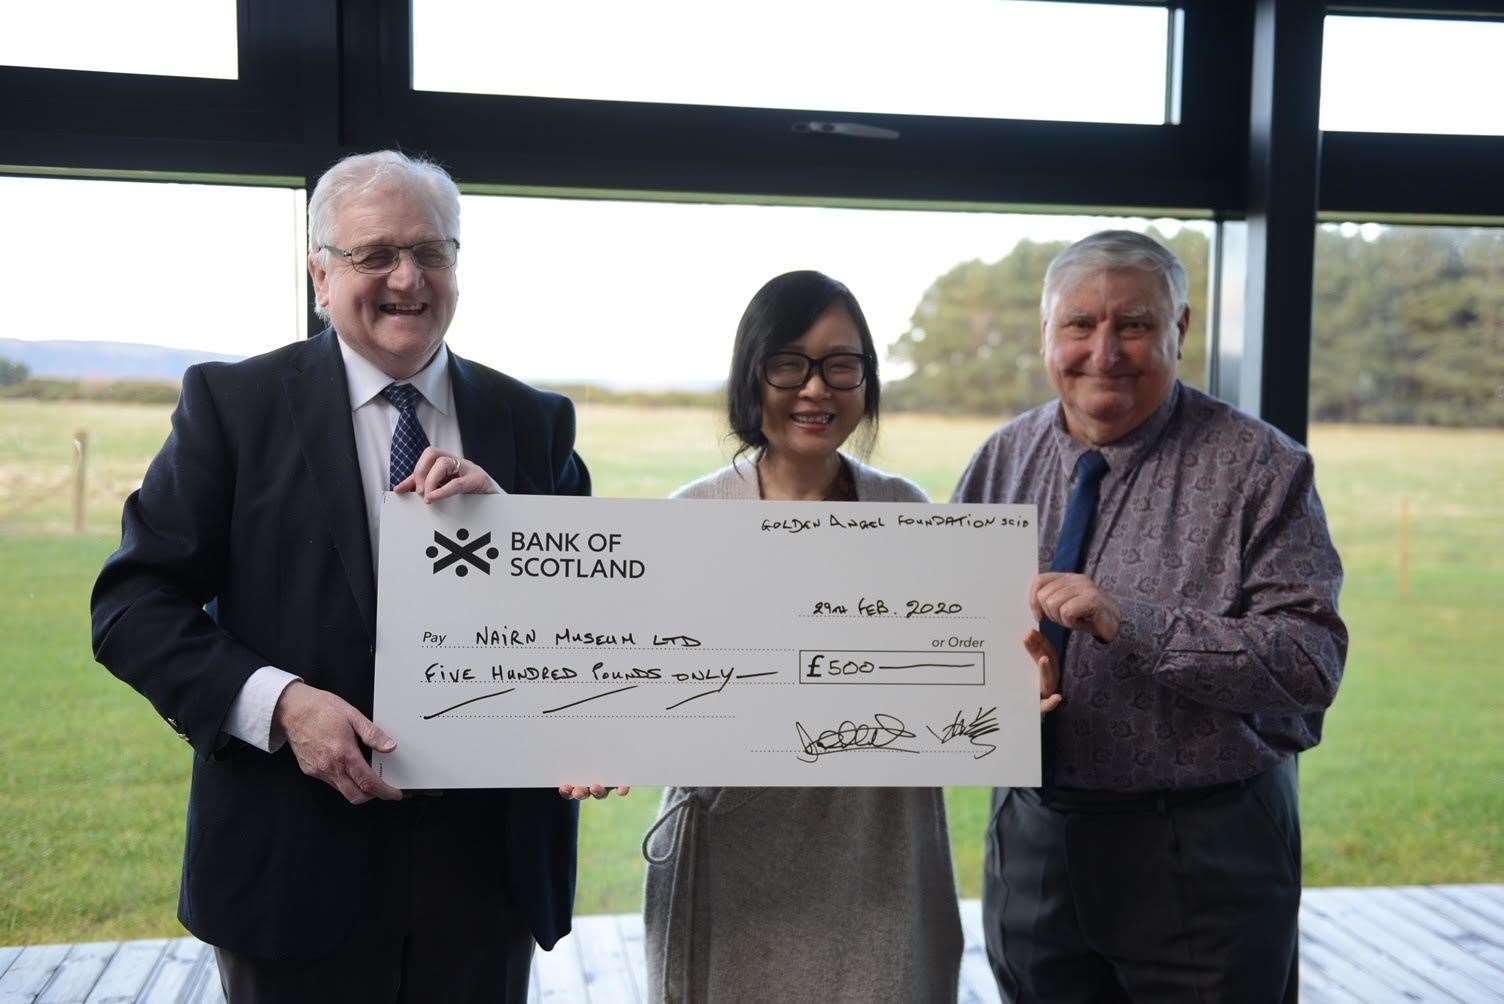 John Urquhart, Nairn Museum trustee receives a cheque for the museum from Diana Xu, Golden Angel trustee and John McCulloch, treasurer of the foundation.